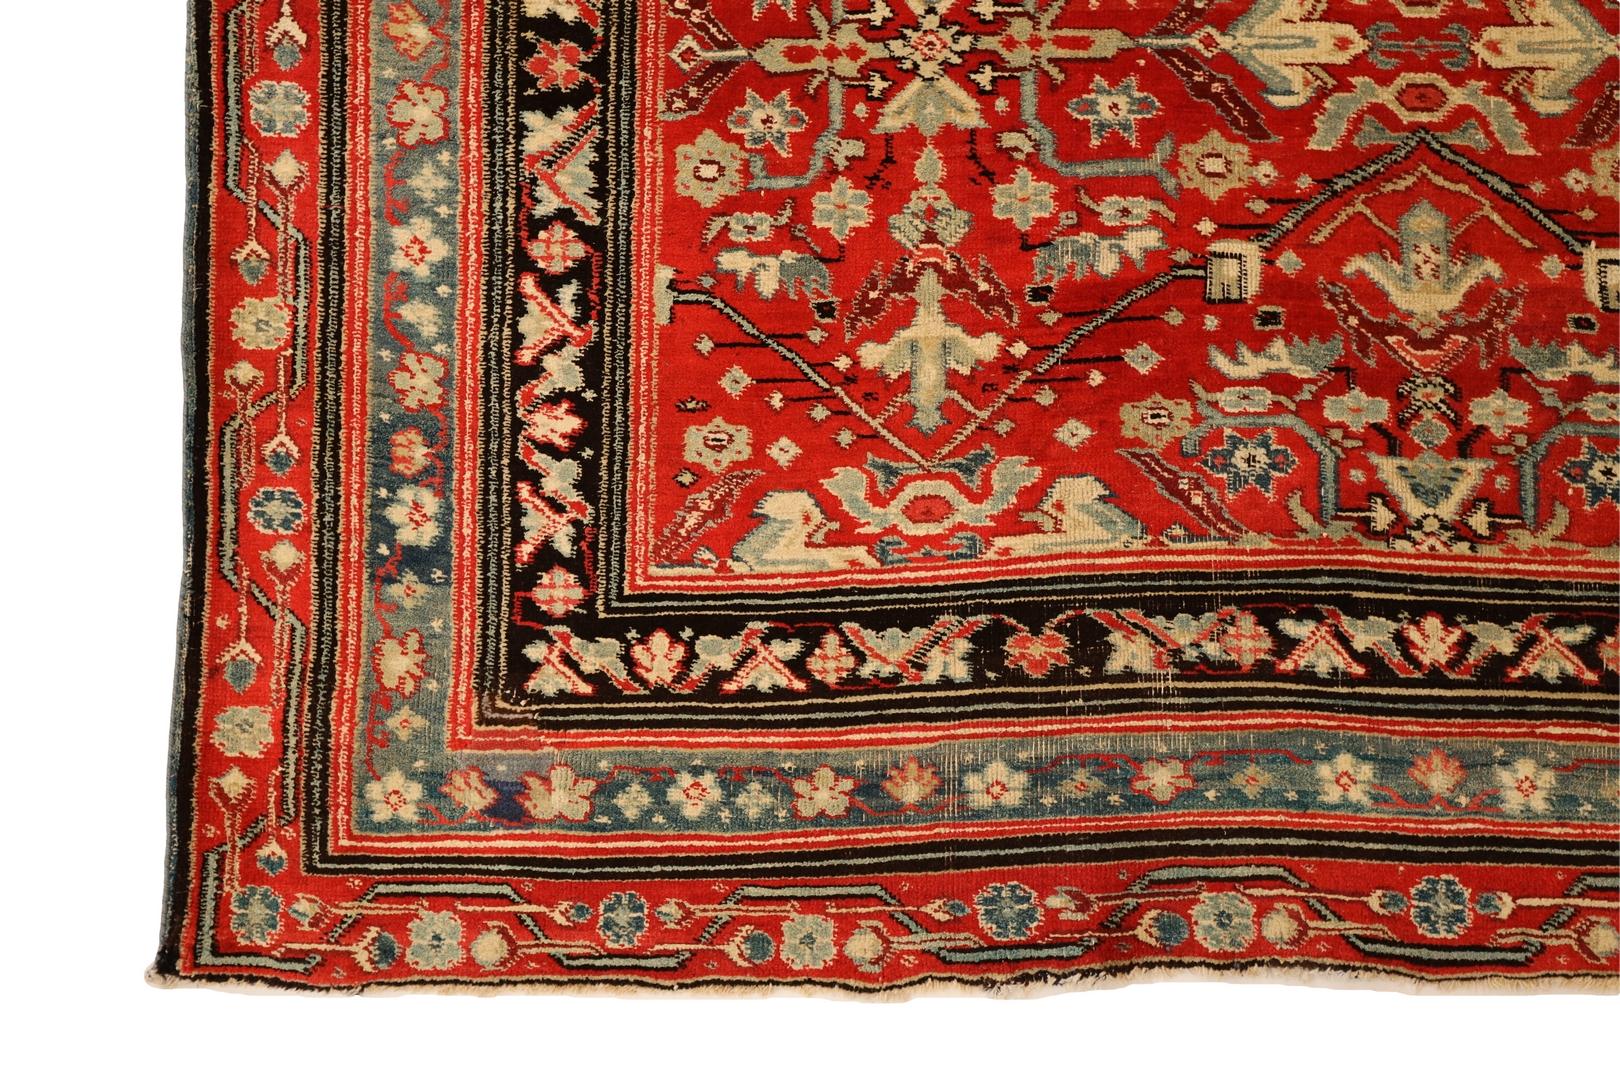 The Agra rug is a true marvel of artistry, showcasing a captivating blend of colors and a distinctive design that sets it apart from other rugs. With a radiant red background, it commands attention and exudes an air of sophistication. The all-over